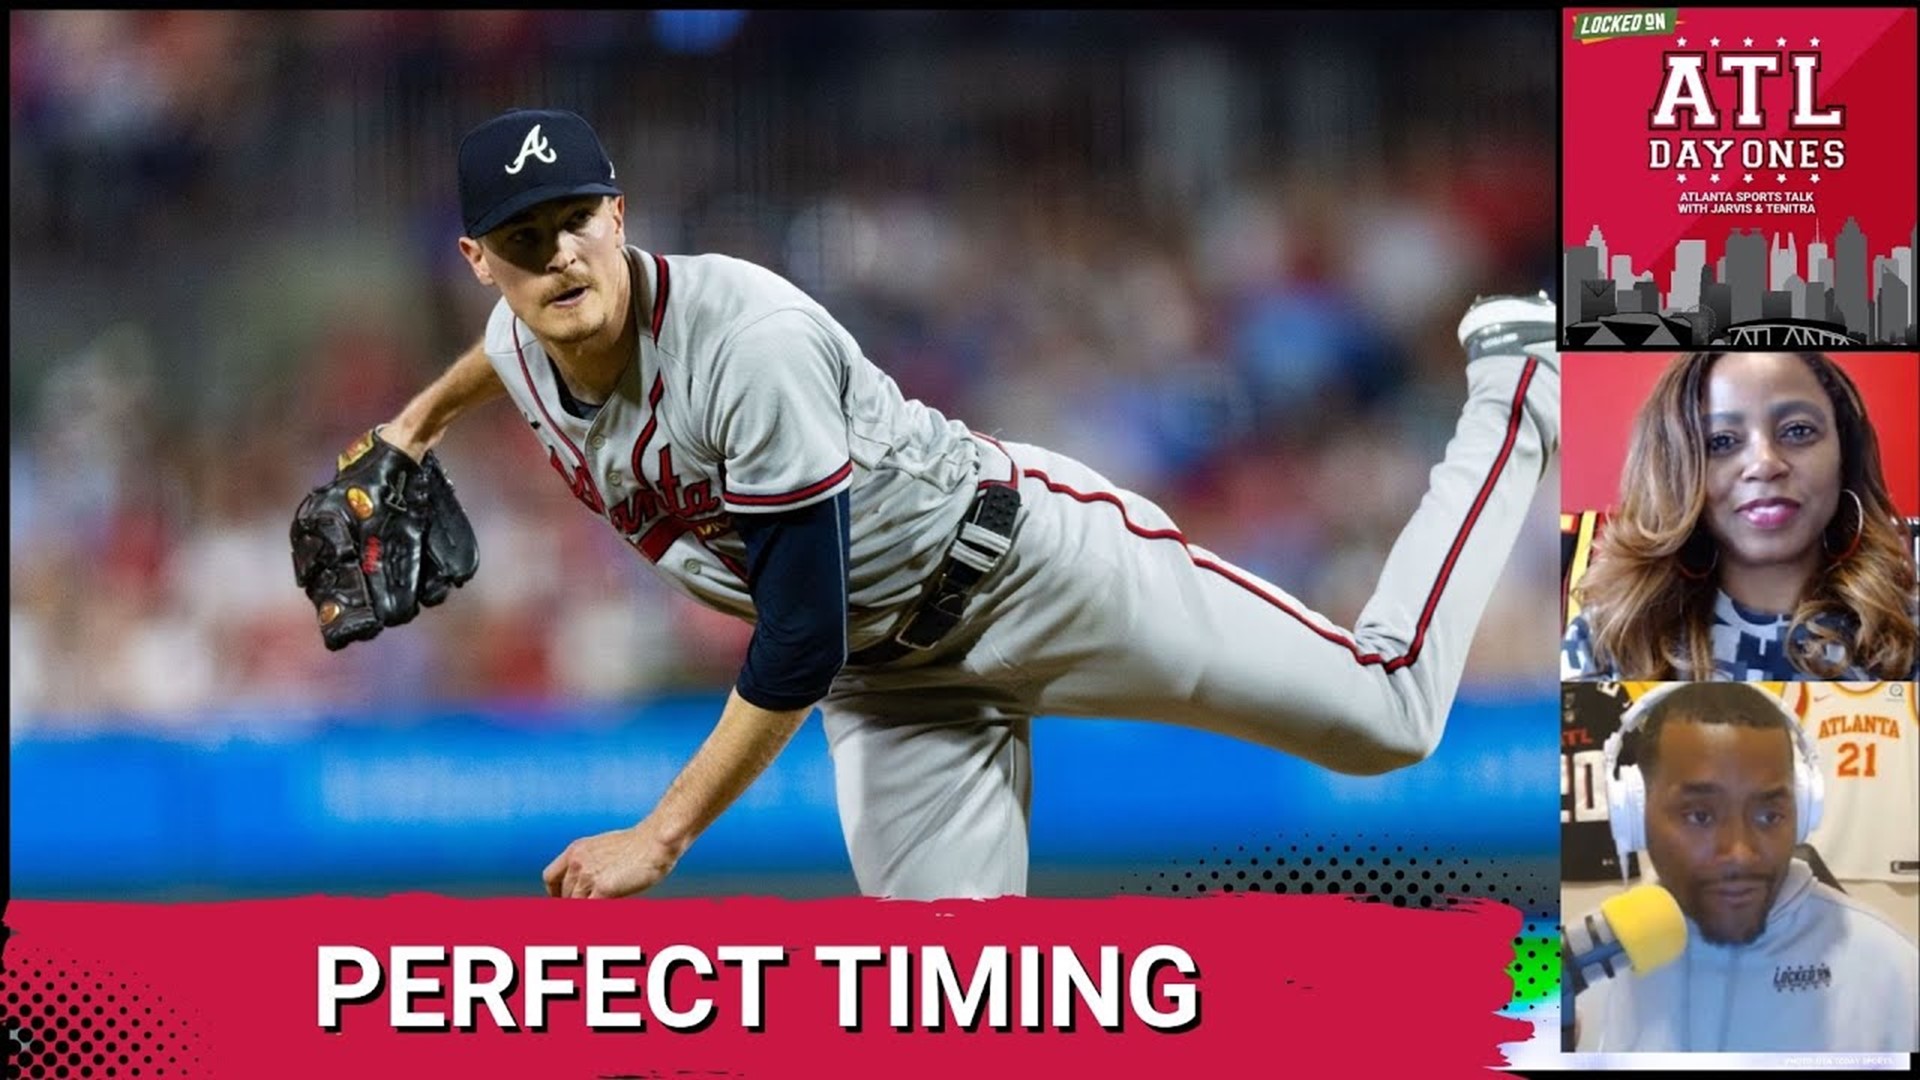 Alex Anthopoulos and the Atlanta Braves have always tried to make decisions that re best for the team. Max Fried proved last night against the Philadelphia Phillies.